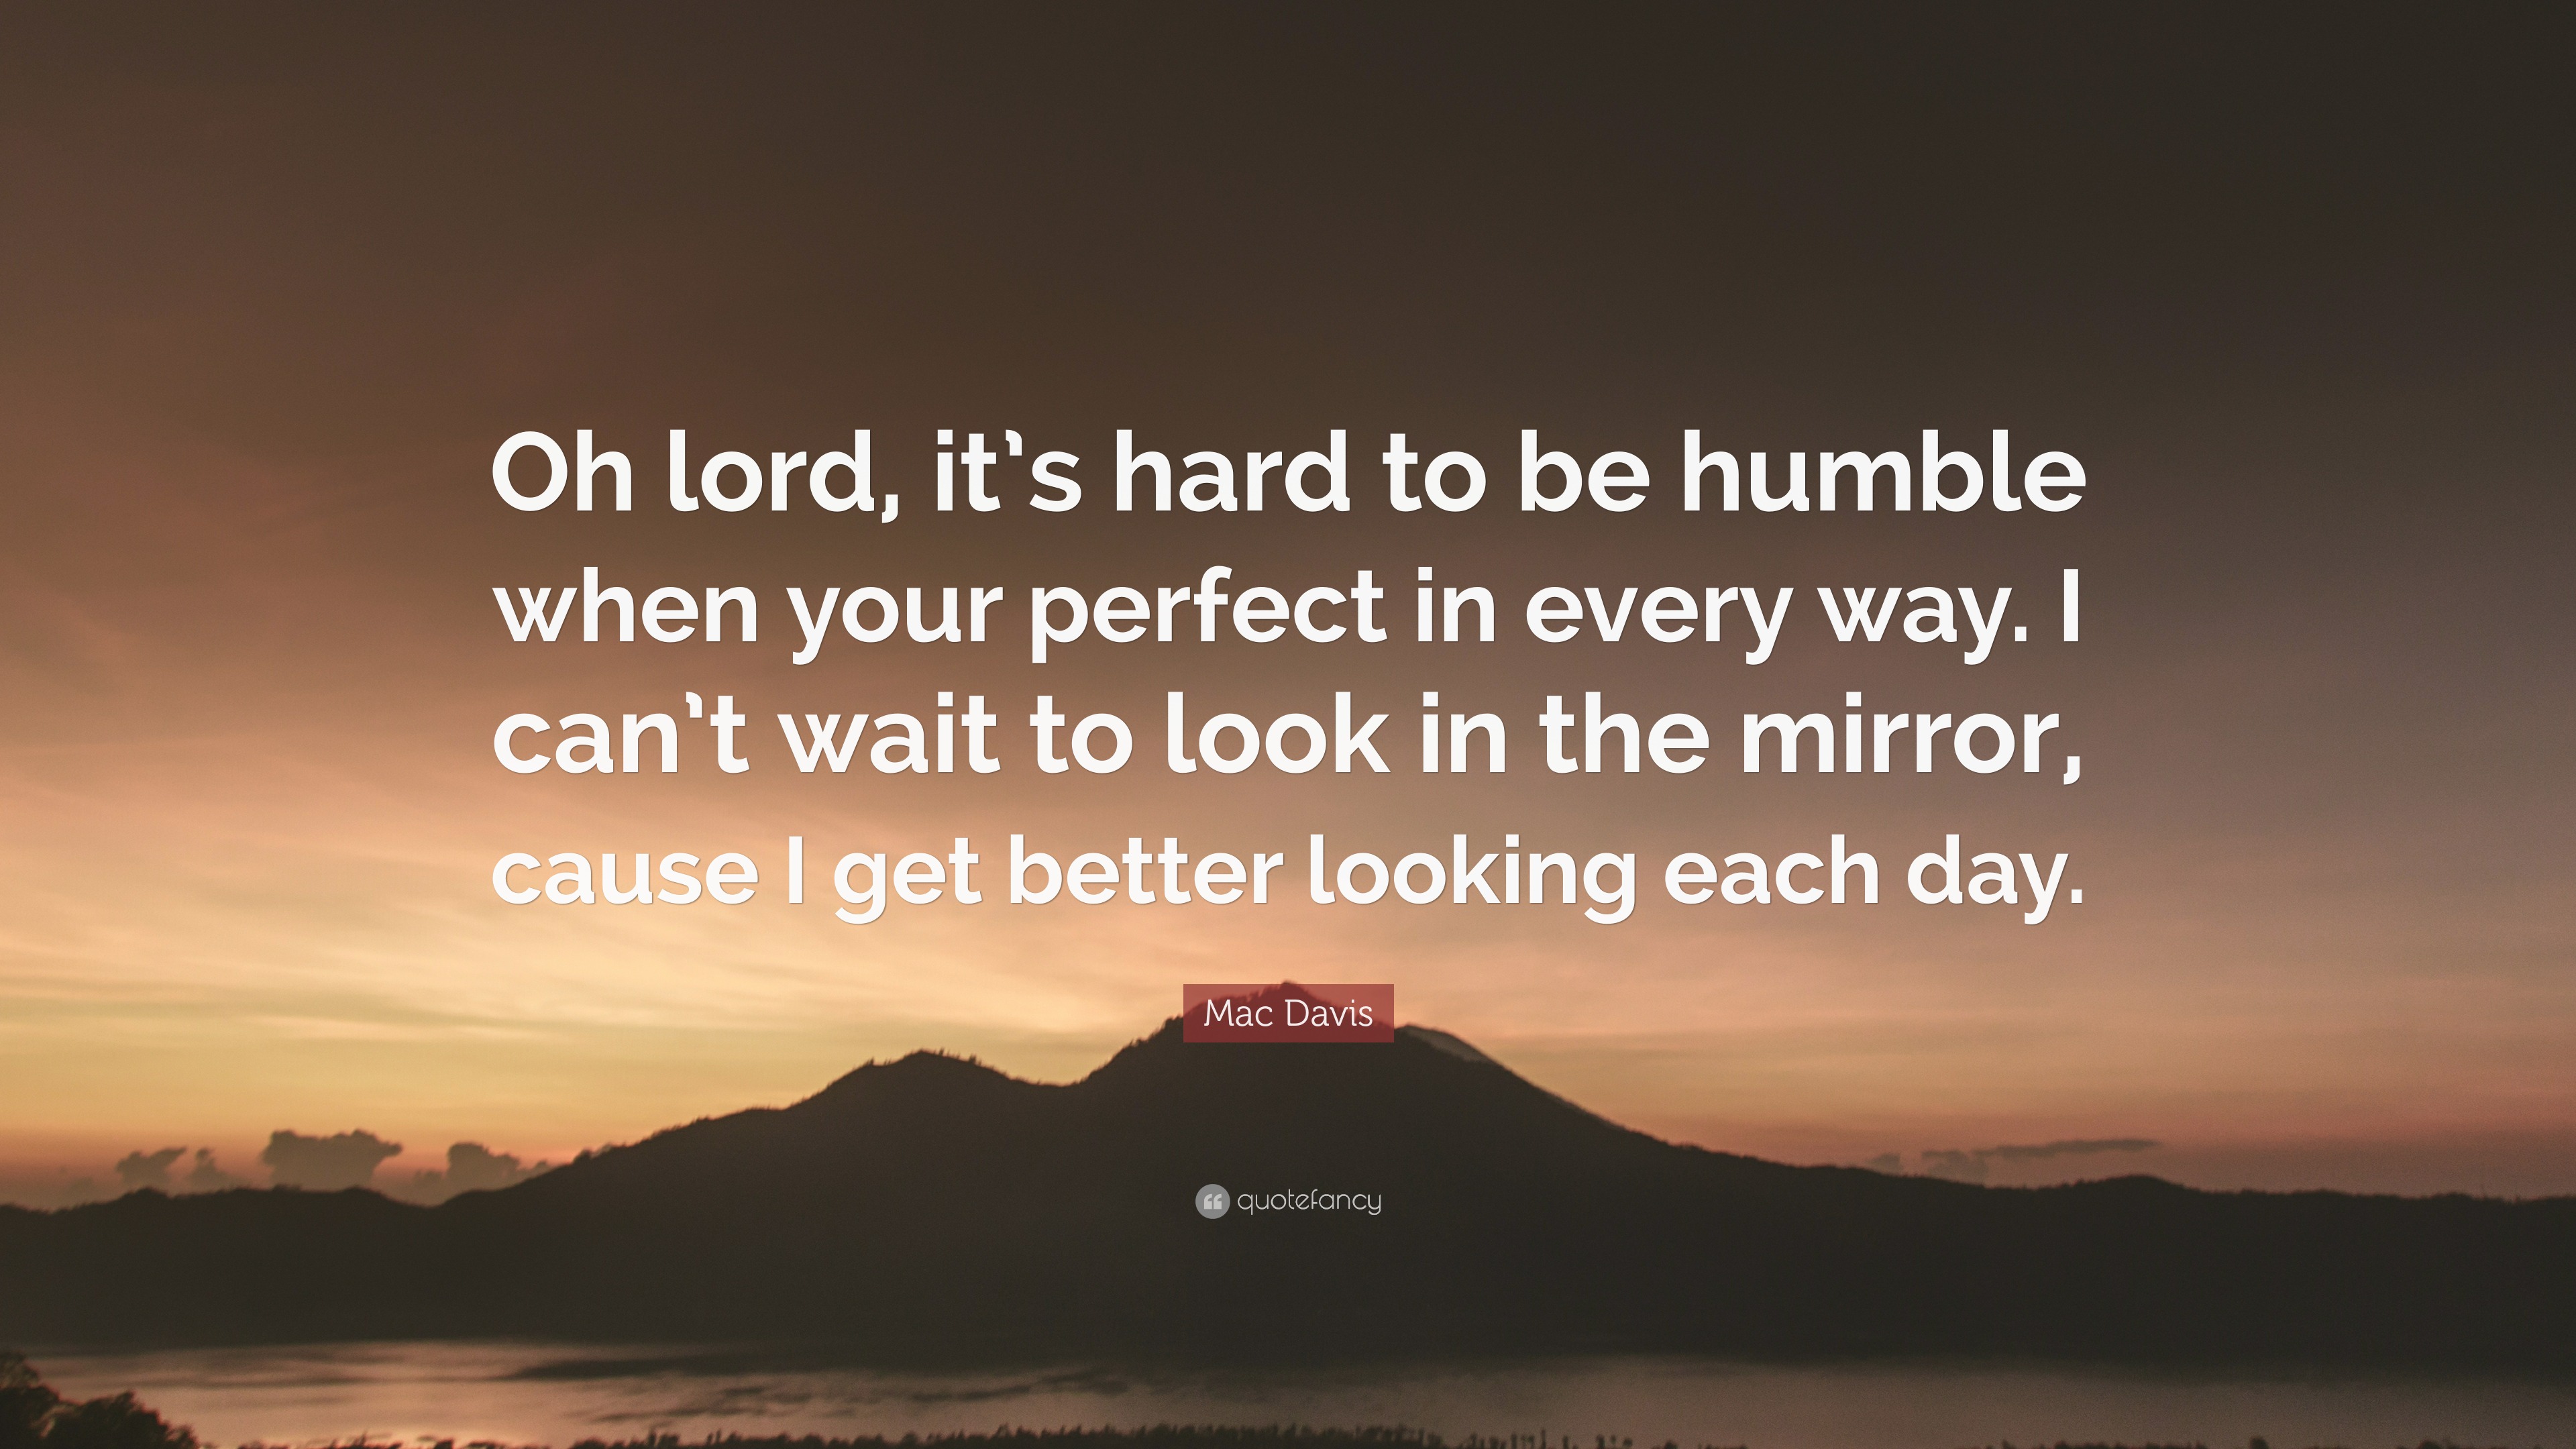 Mac Davis Quote: “Oh lord, it’s hard to be humble when your perfect in